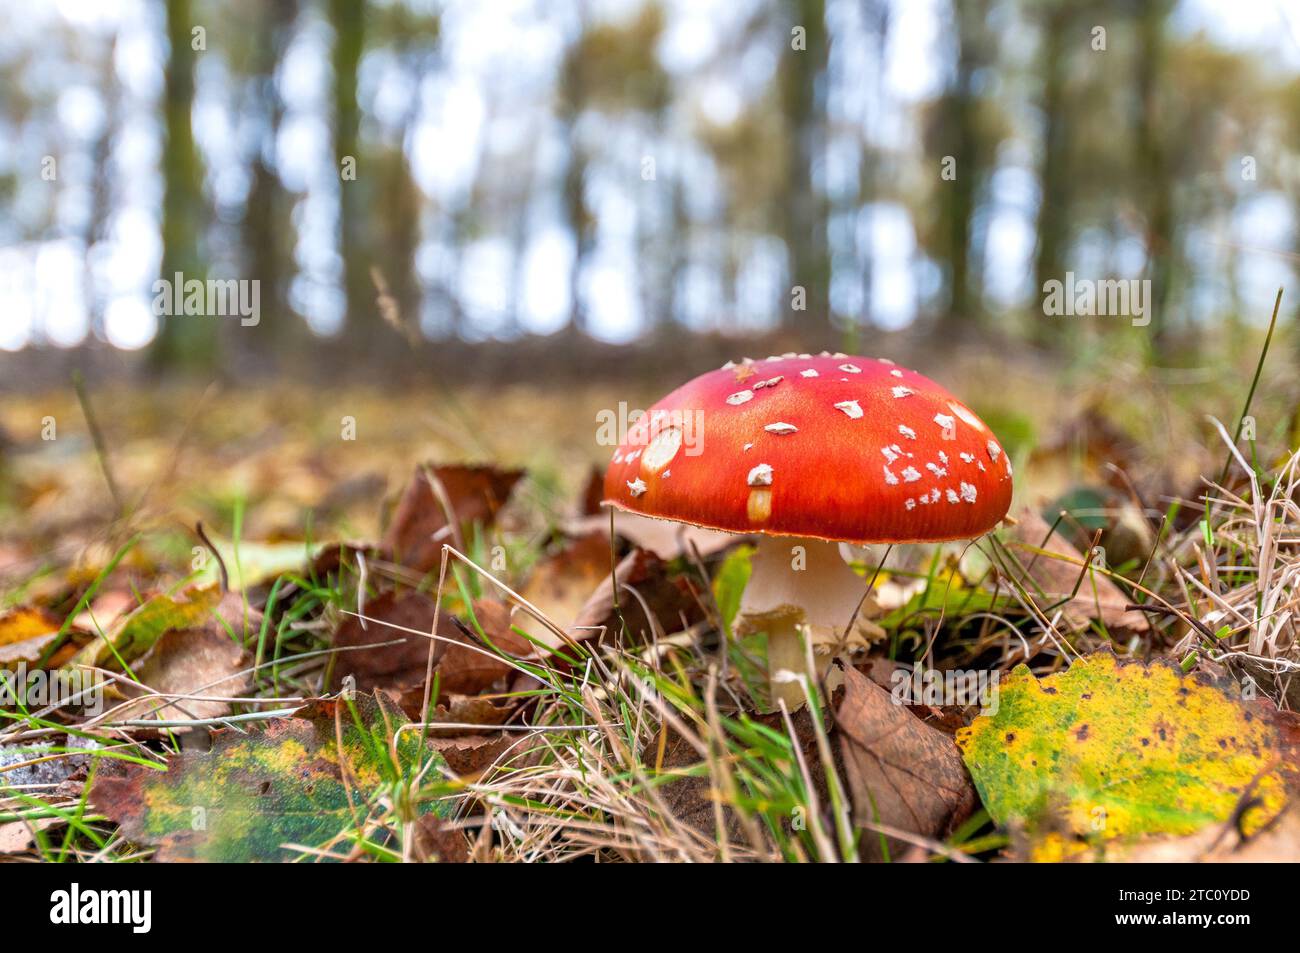 Fly amanita mushroom growing among the leaves of the forest ground Stock Photo